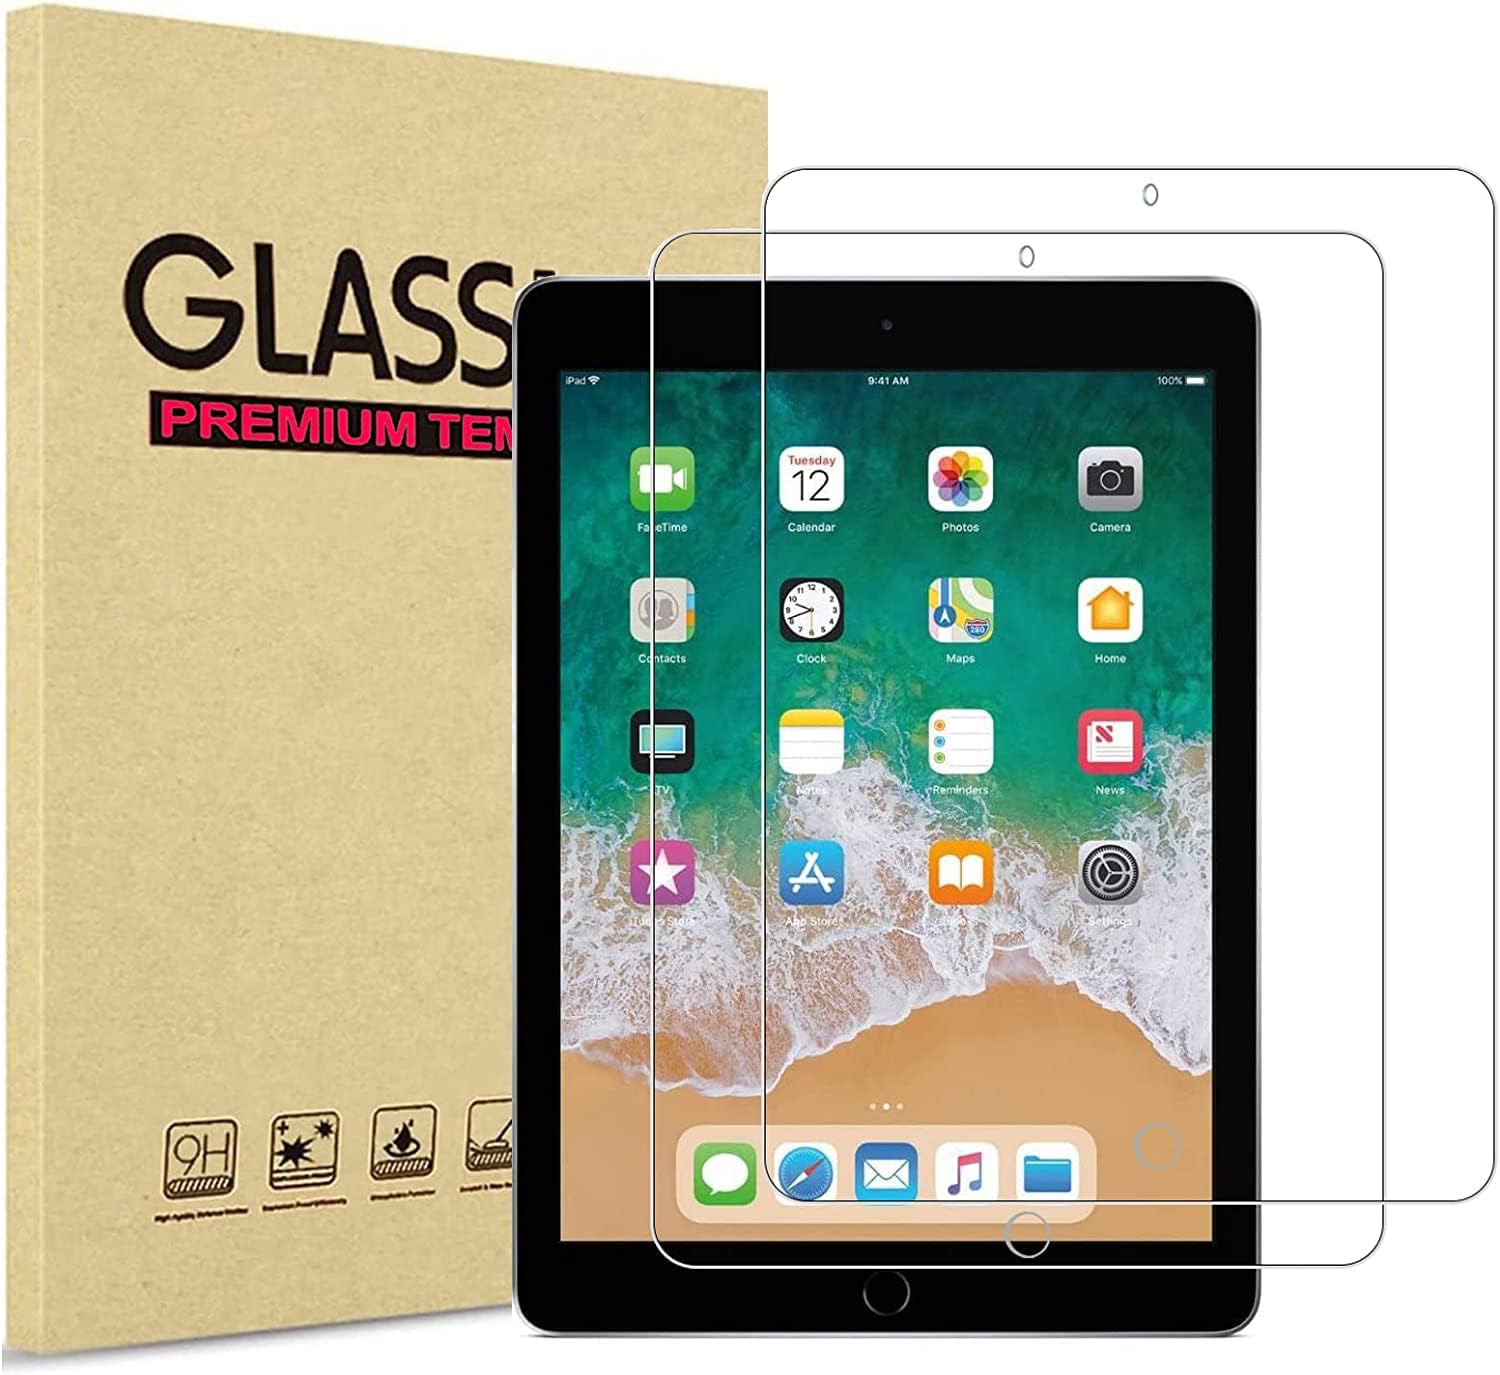 Premium Tempered Glass Screen Protector for iPad Pro 12.9 (2015/2017) *Free Shipping*